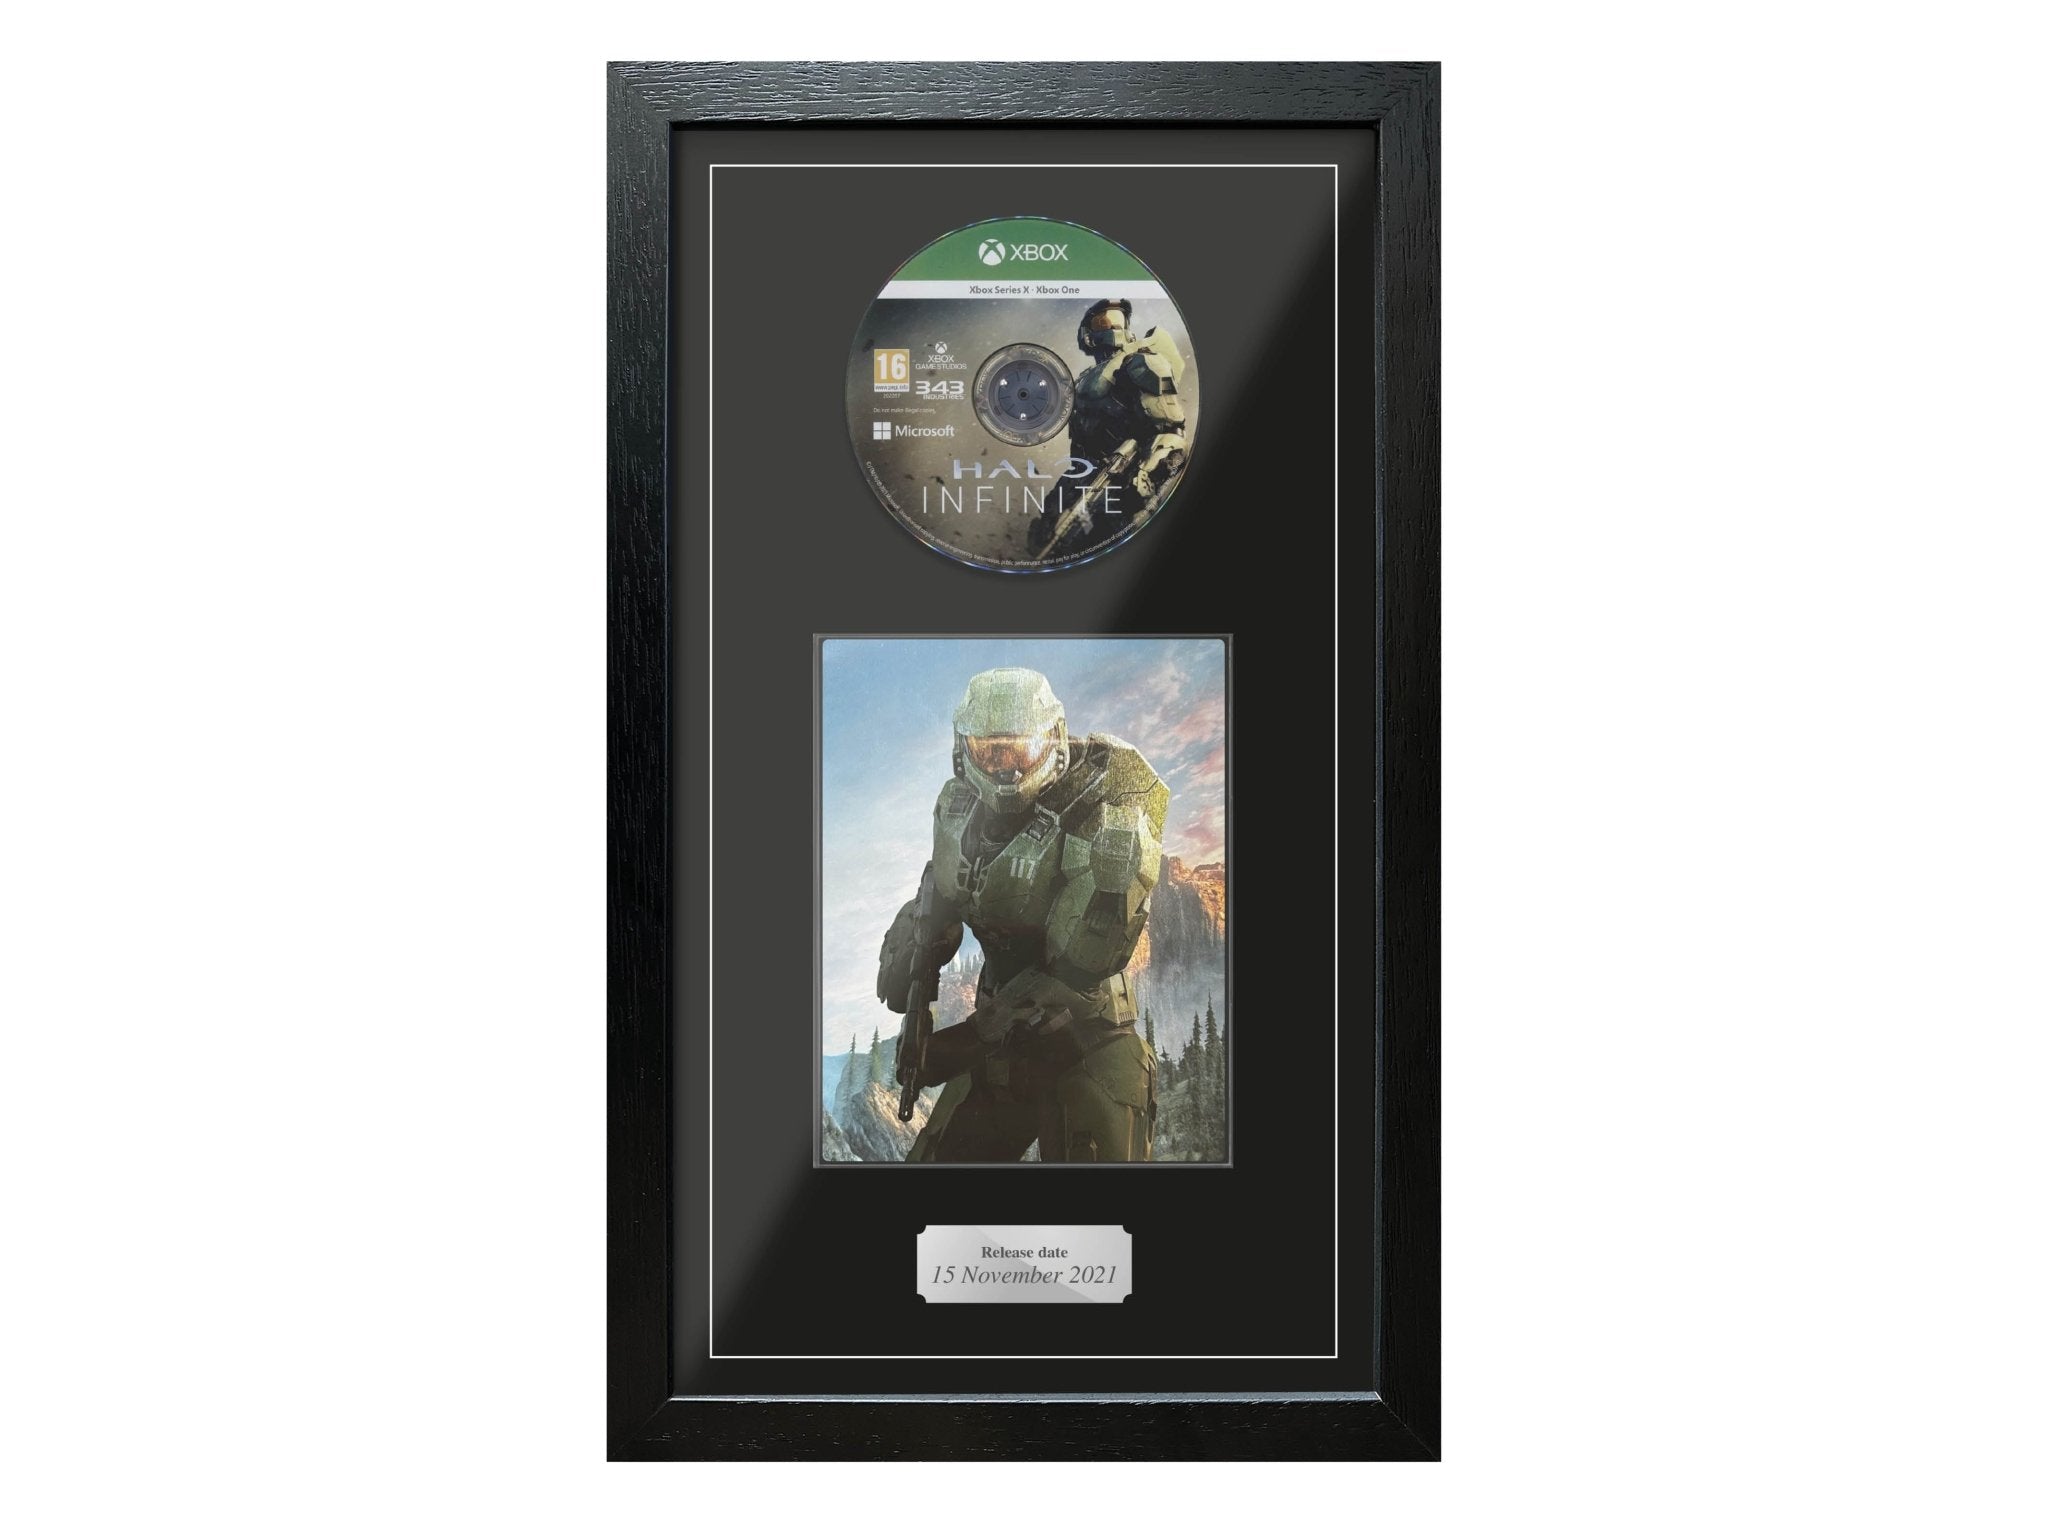 Halo Infinite Steelbook Edition (Exhibition Range) Framed Game - Frame-A-Game